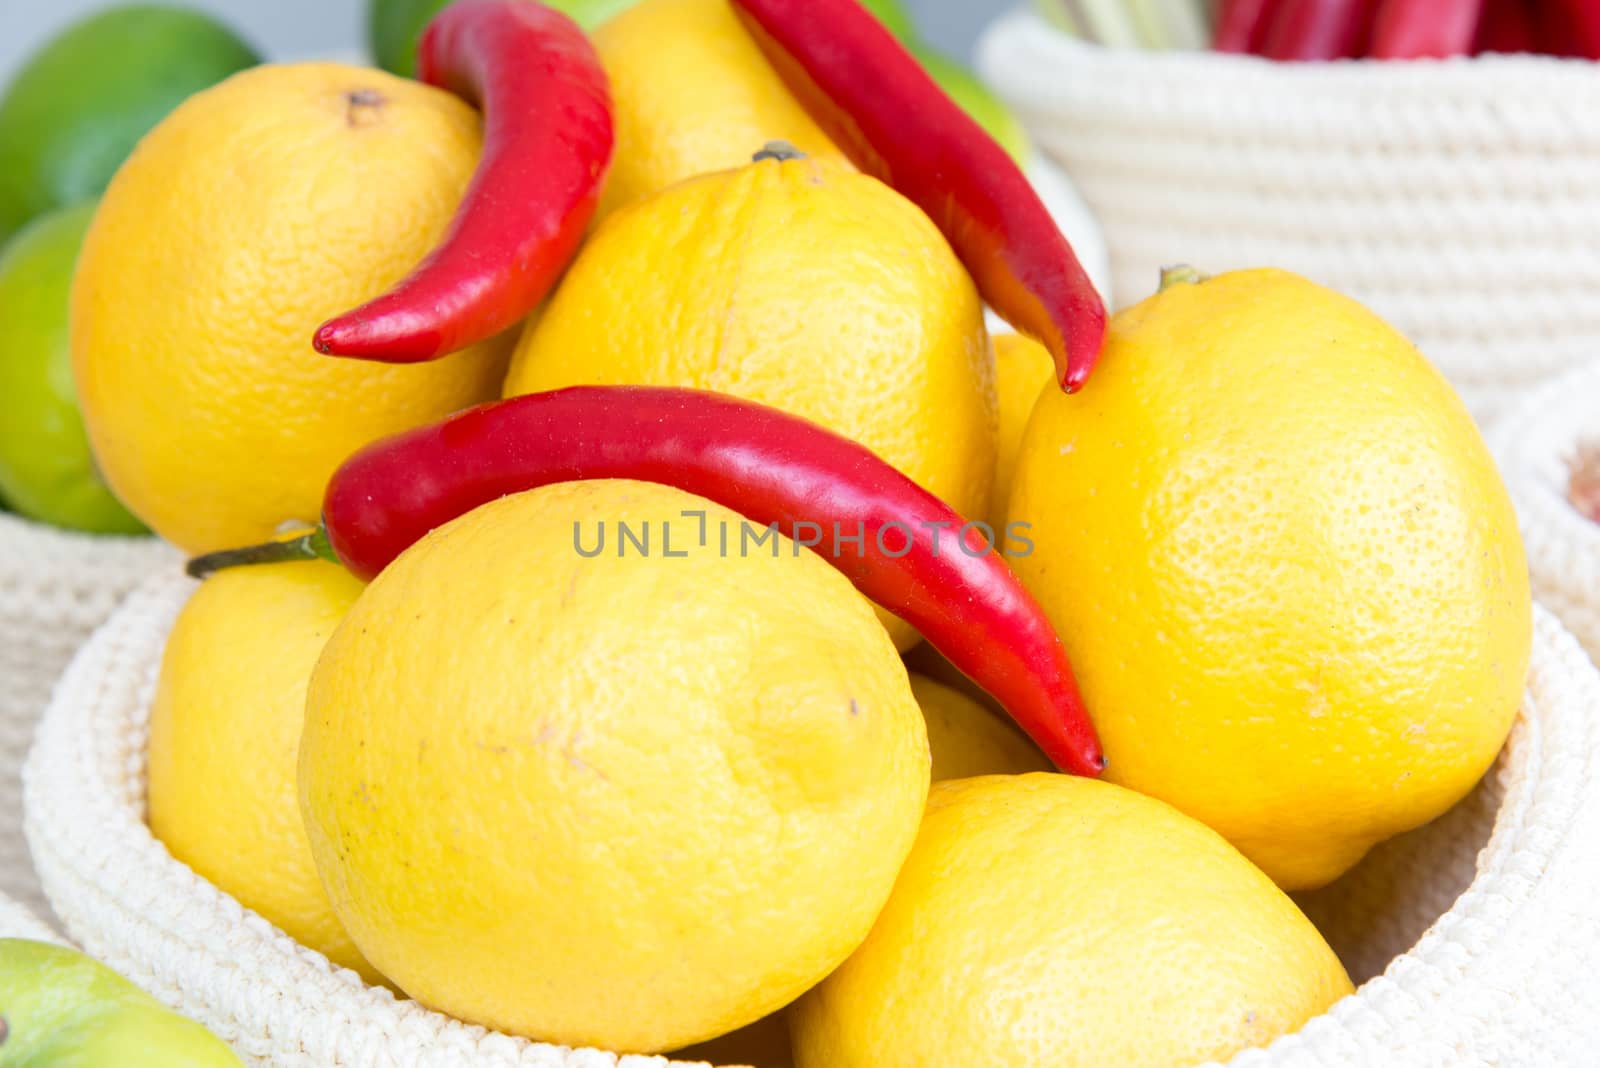 lemons and chili peppers in a wicker basket close-up by vlaru